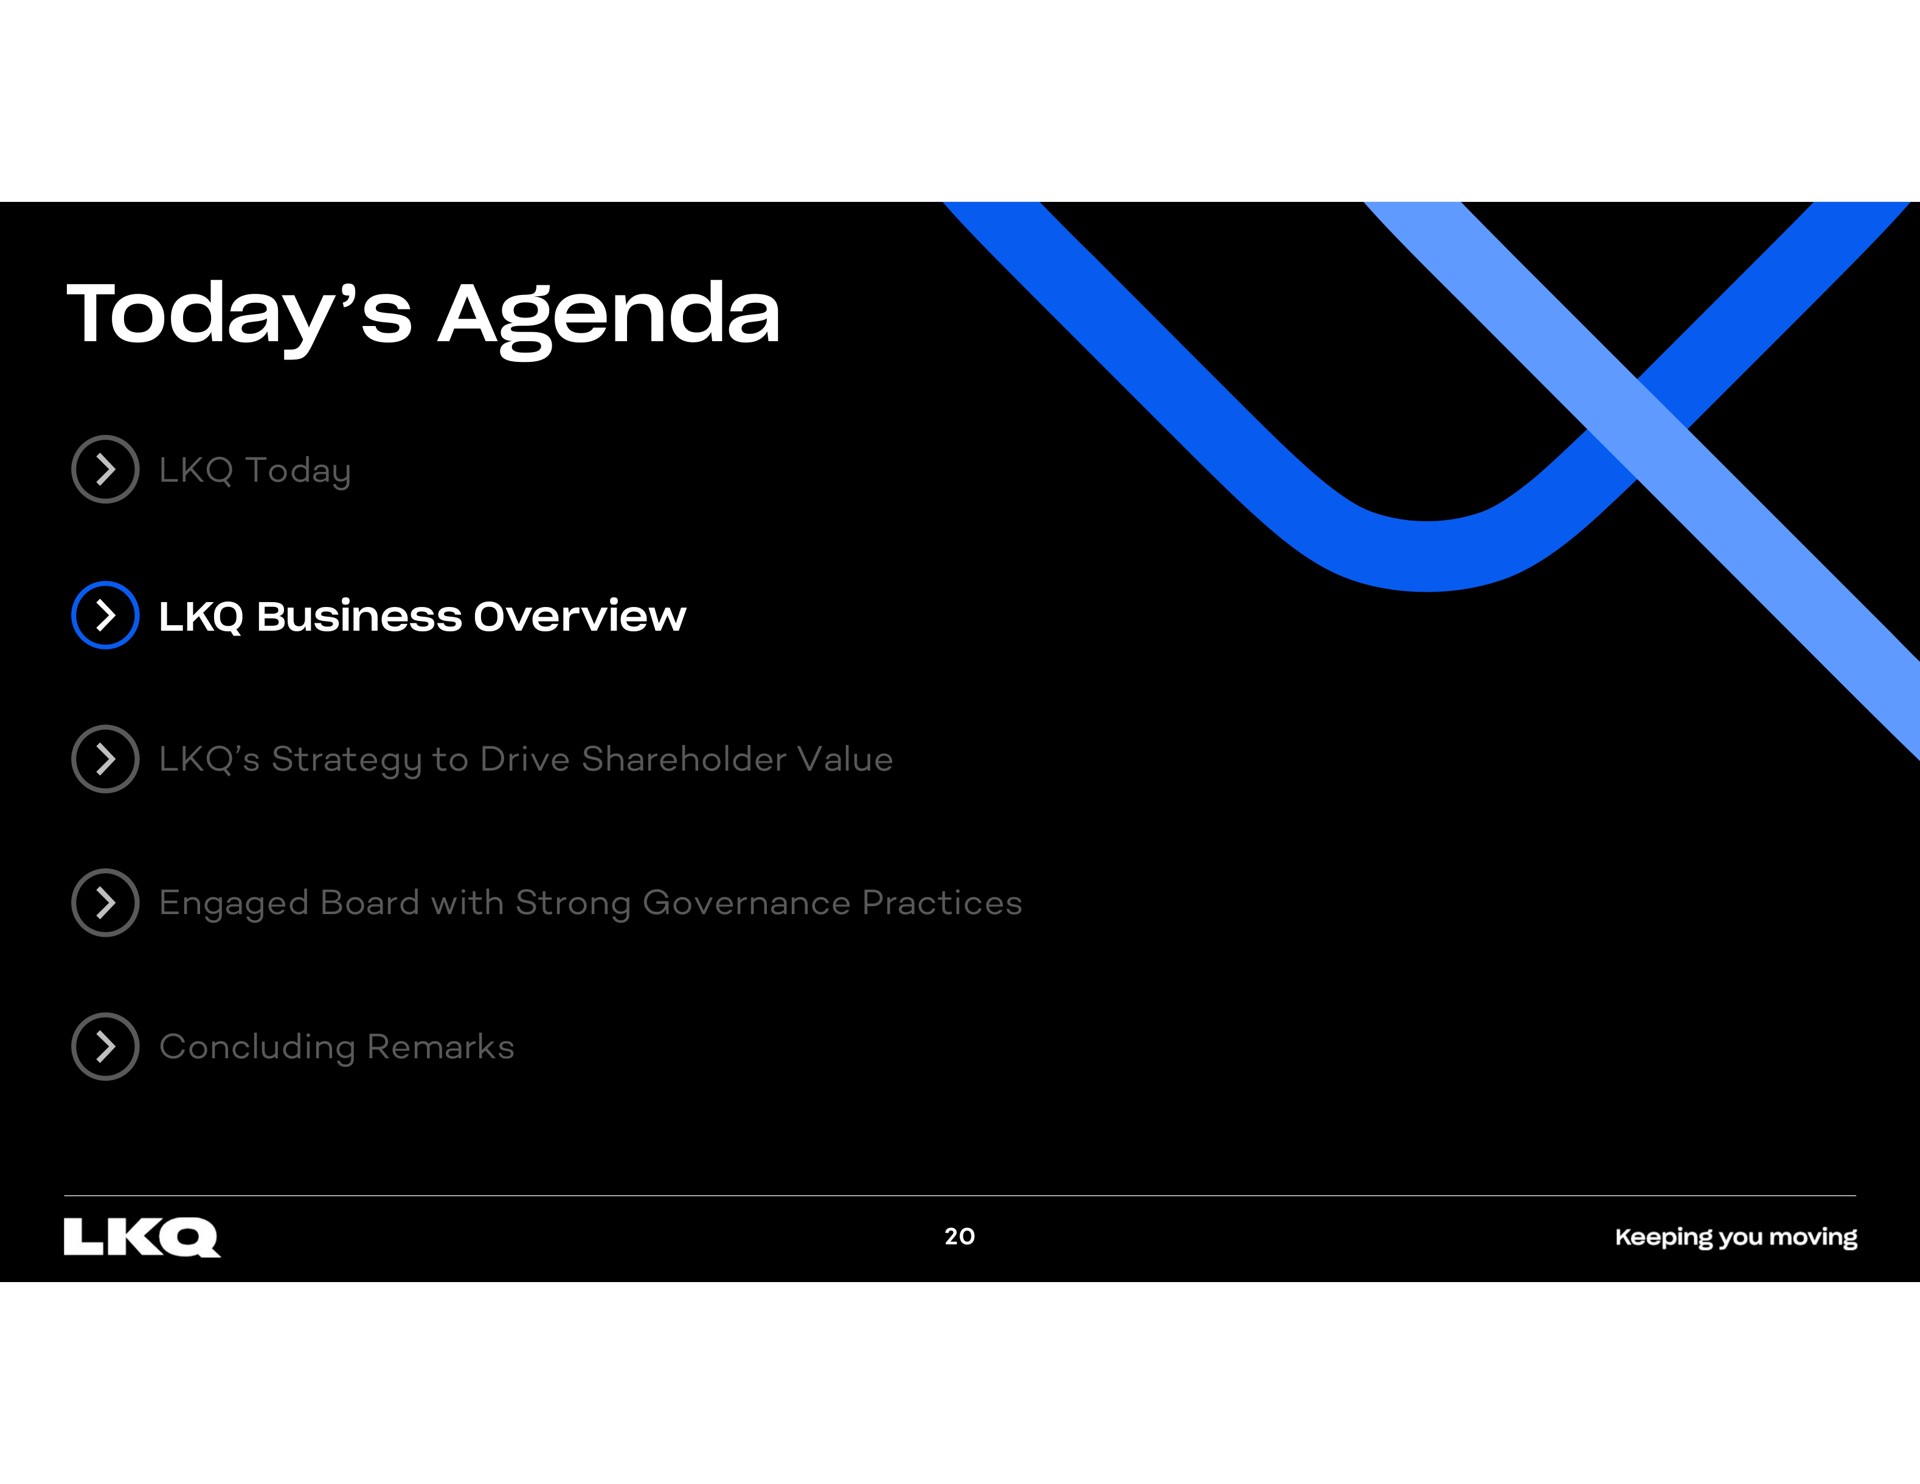 today agenda today business overview strategy to drive shareholder value engaged board with strong governance practices concluding remarks | LKQ